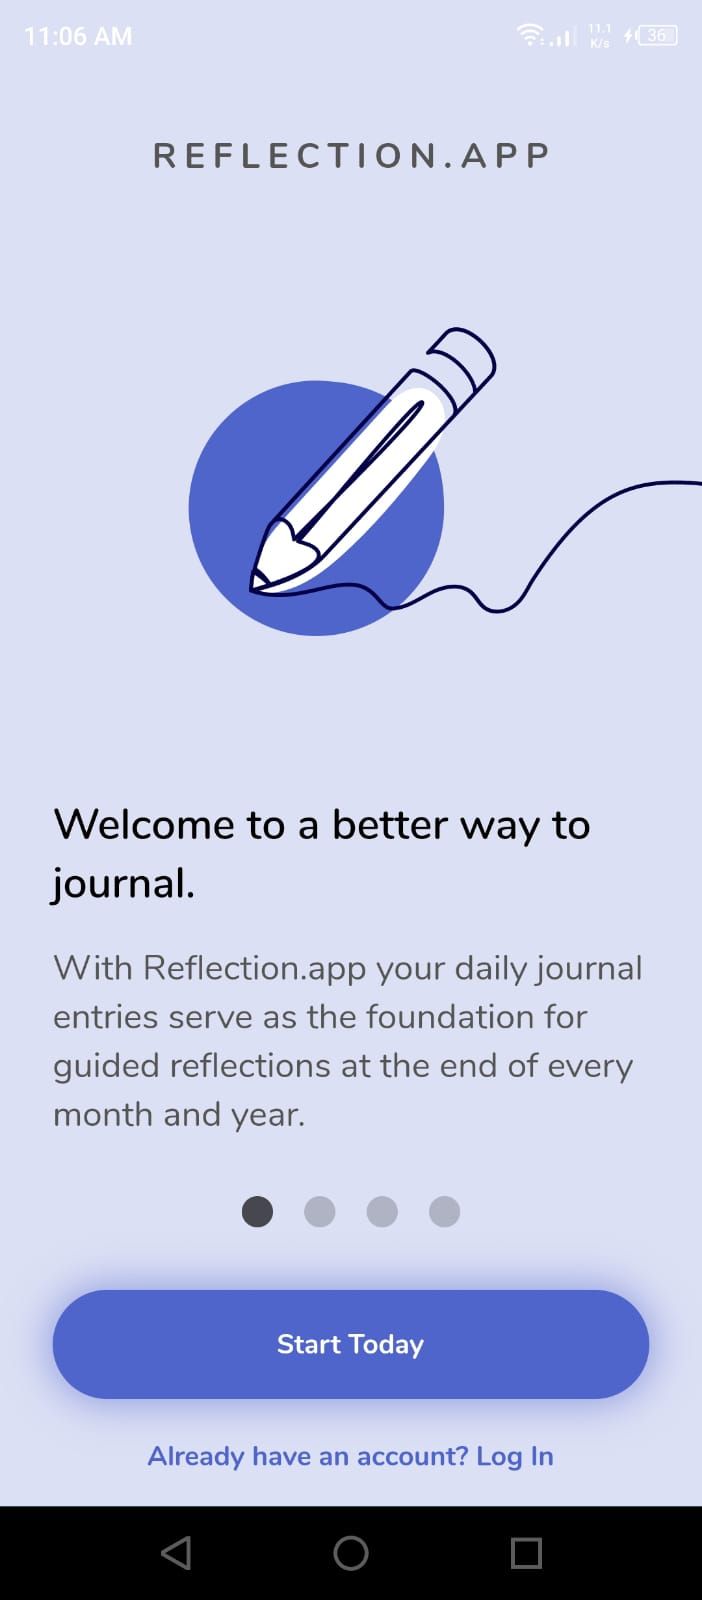 Reflection.app - Get Started Page